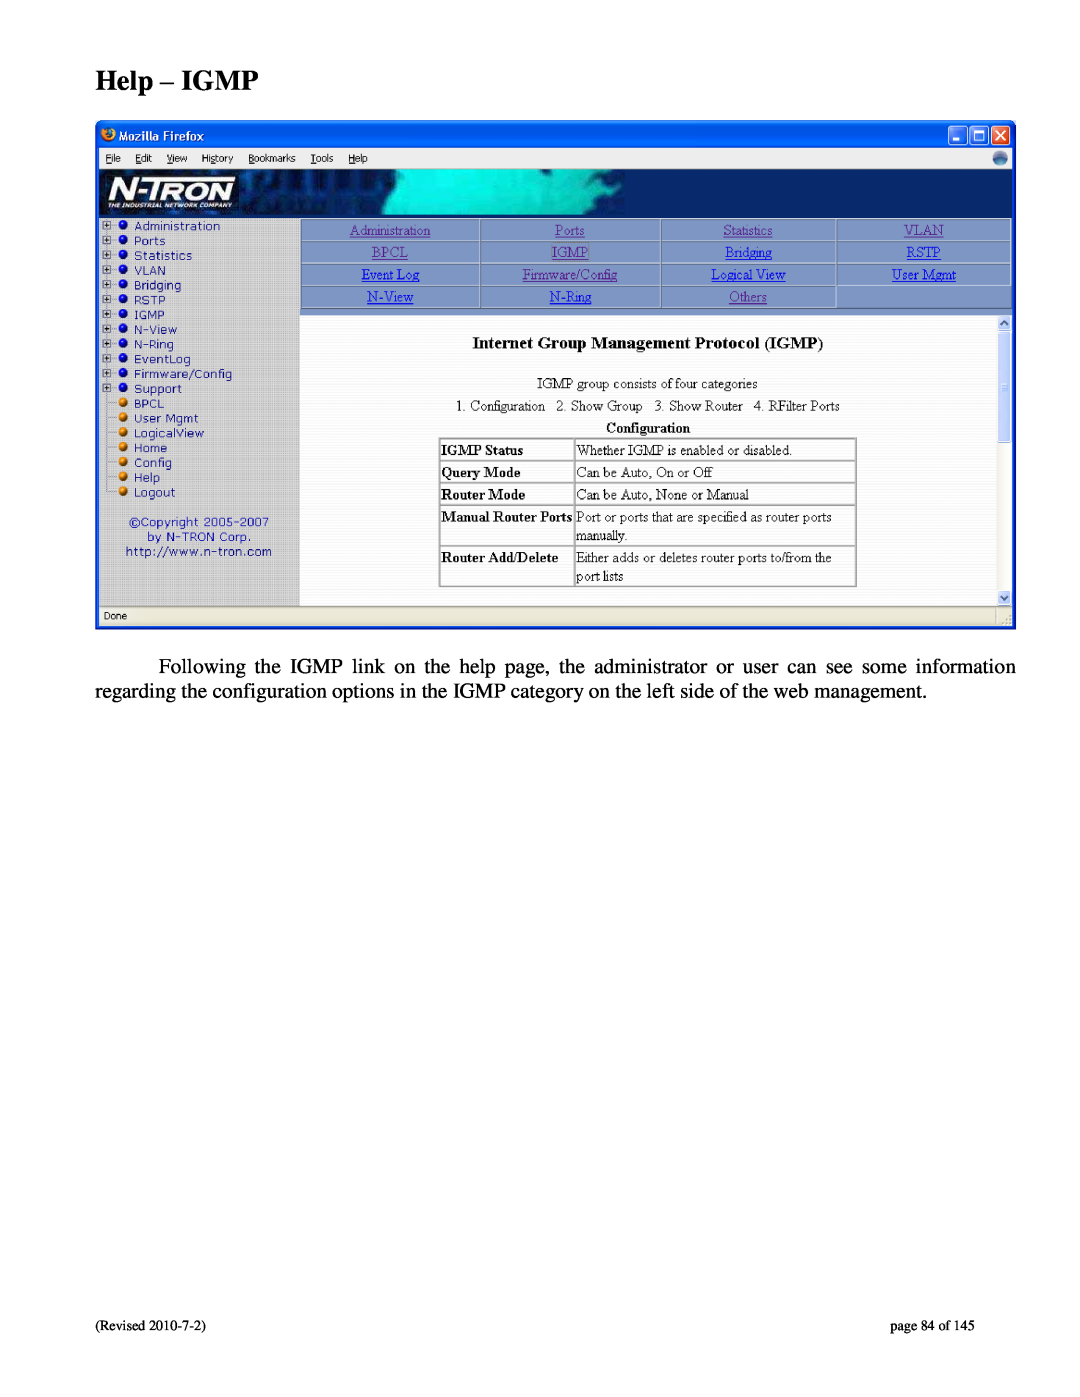 N-Tron 9000 user manual Help - IGMP, page 84 of 